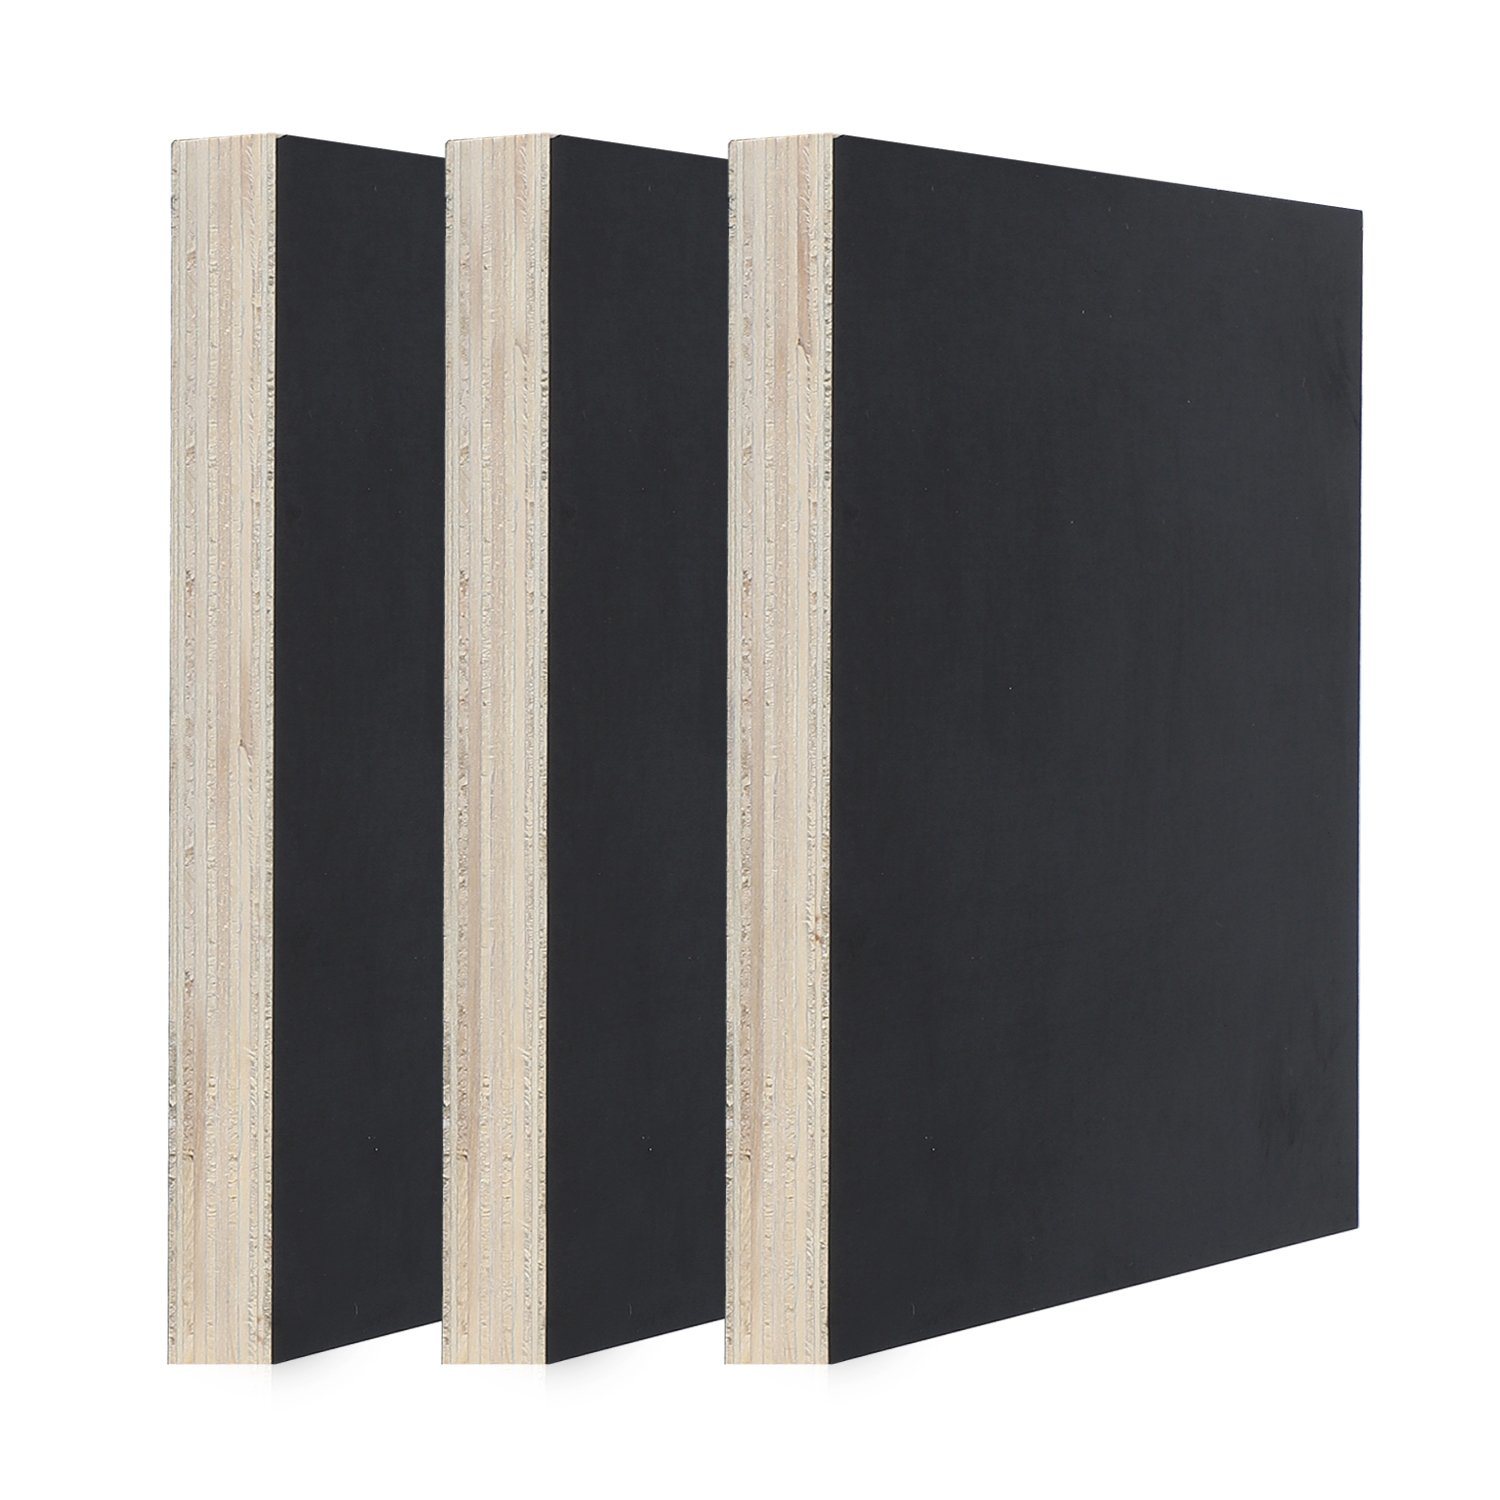 Black Film Faced Formwork Plywood Board Concrete Plywood for Construction